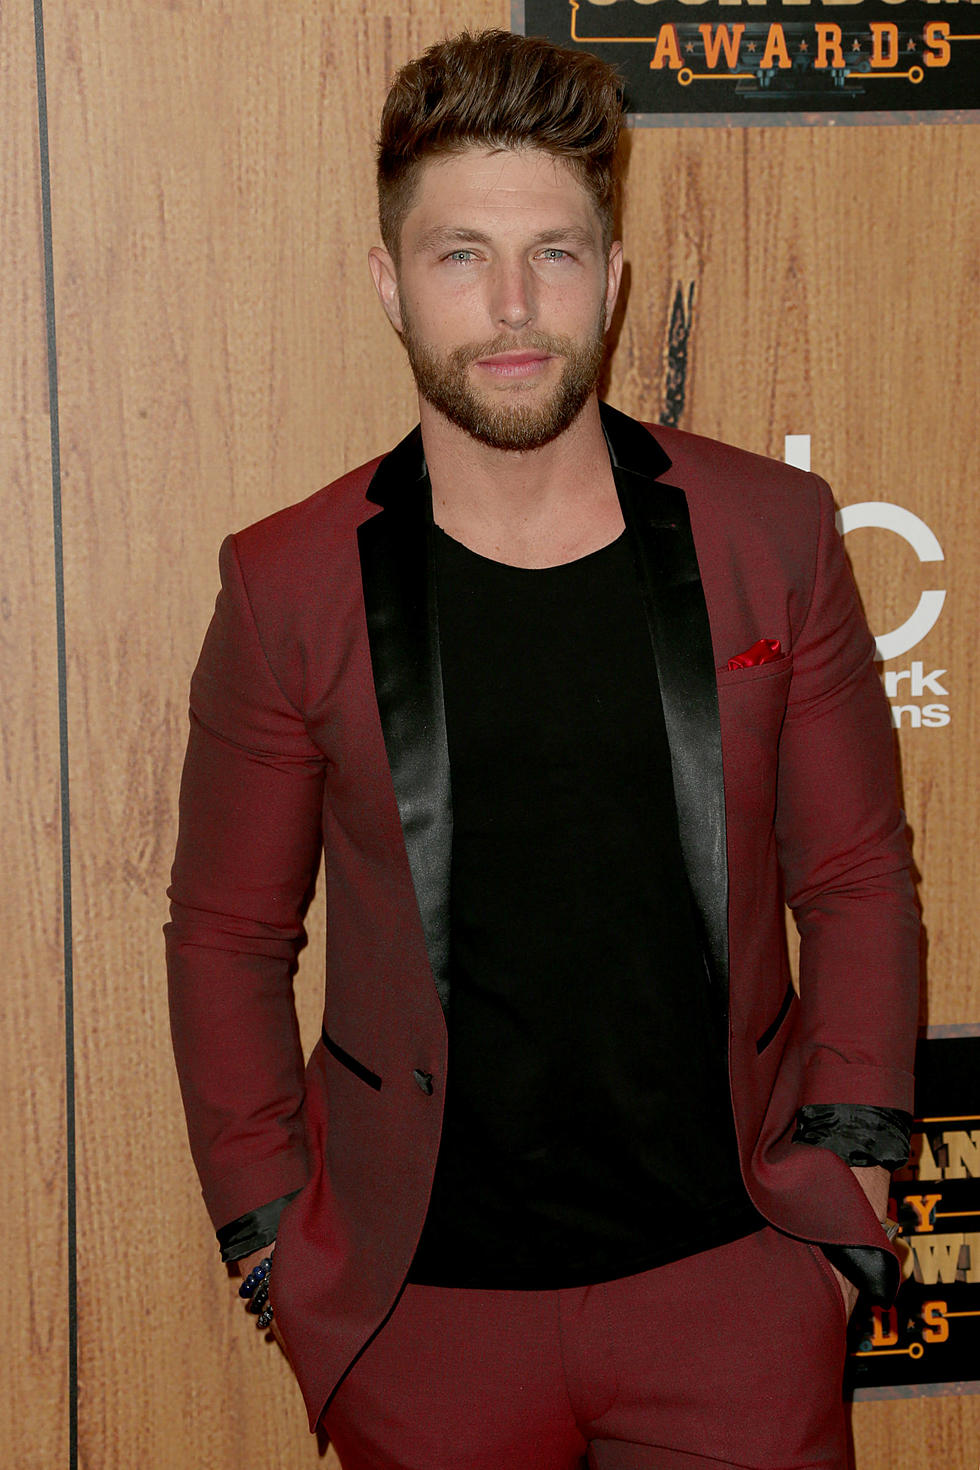 Country Music Wasn’t Chris Lane’s First Career Choice